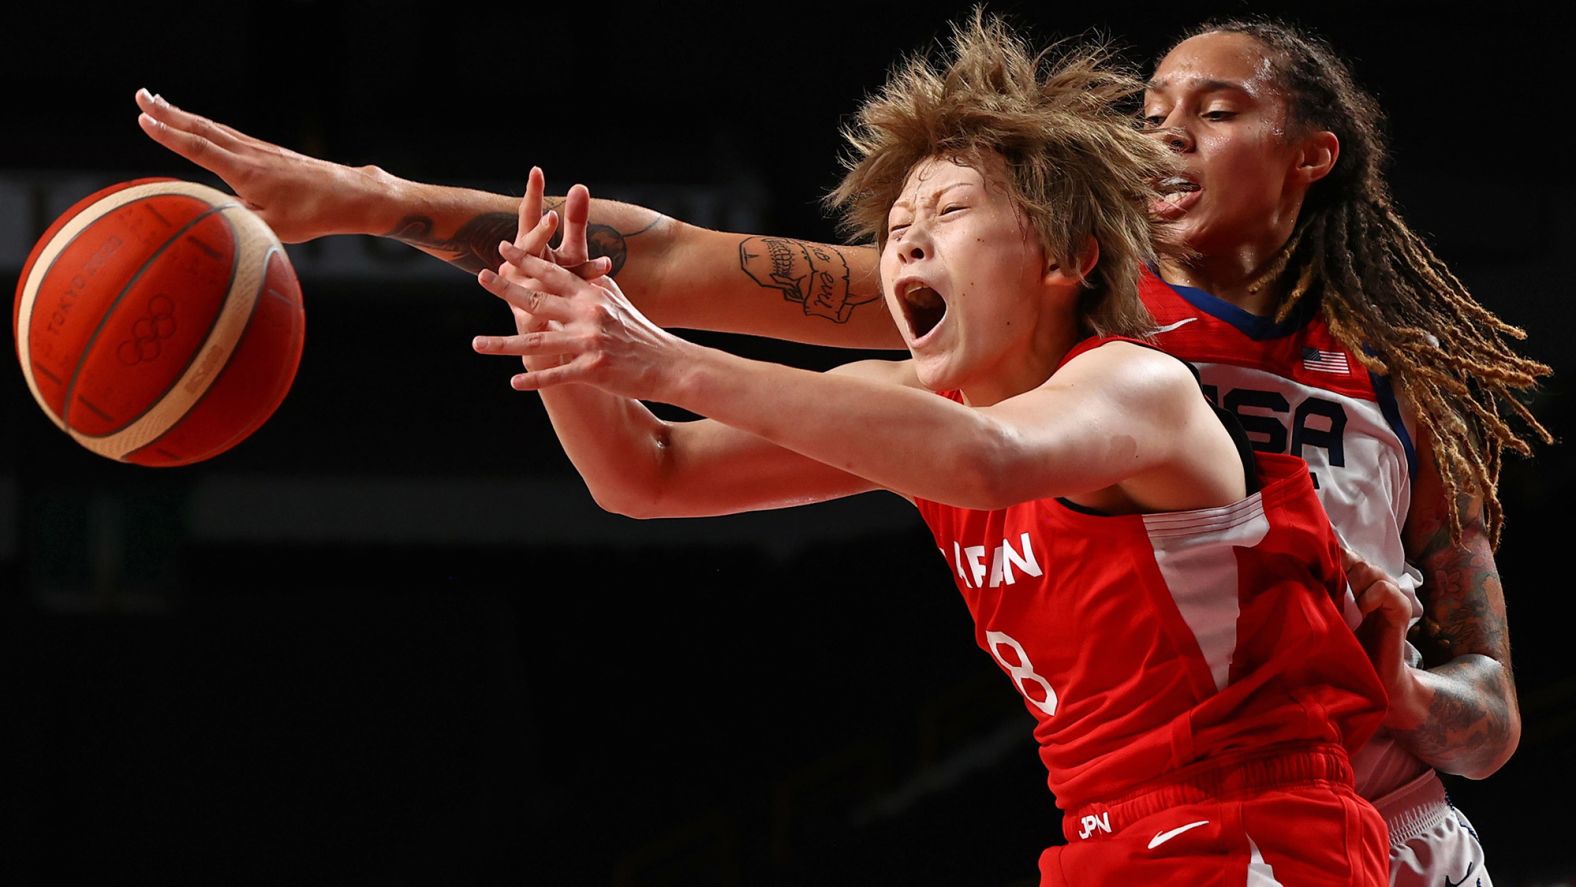 The United States' Brittney Griner, right, defends Japan's Maki Takada during the gold-medal basketball game on August 8. Griner scored 30 points as <a href="index.php?page=&url=https%3A%2F%2Fwww.cnn.com%2Fworld%2Flive-news%2Ftokyo-2020-olympics-08-08-21-spt%2Fh_503bb19990d71b68b2d84343466c24c1" target="_blank">the Americans won 90-75.</a> It is the seventh consecutive gold medal for the US women's basketball team.